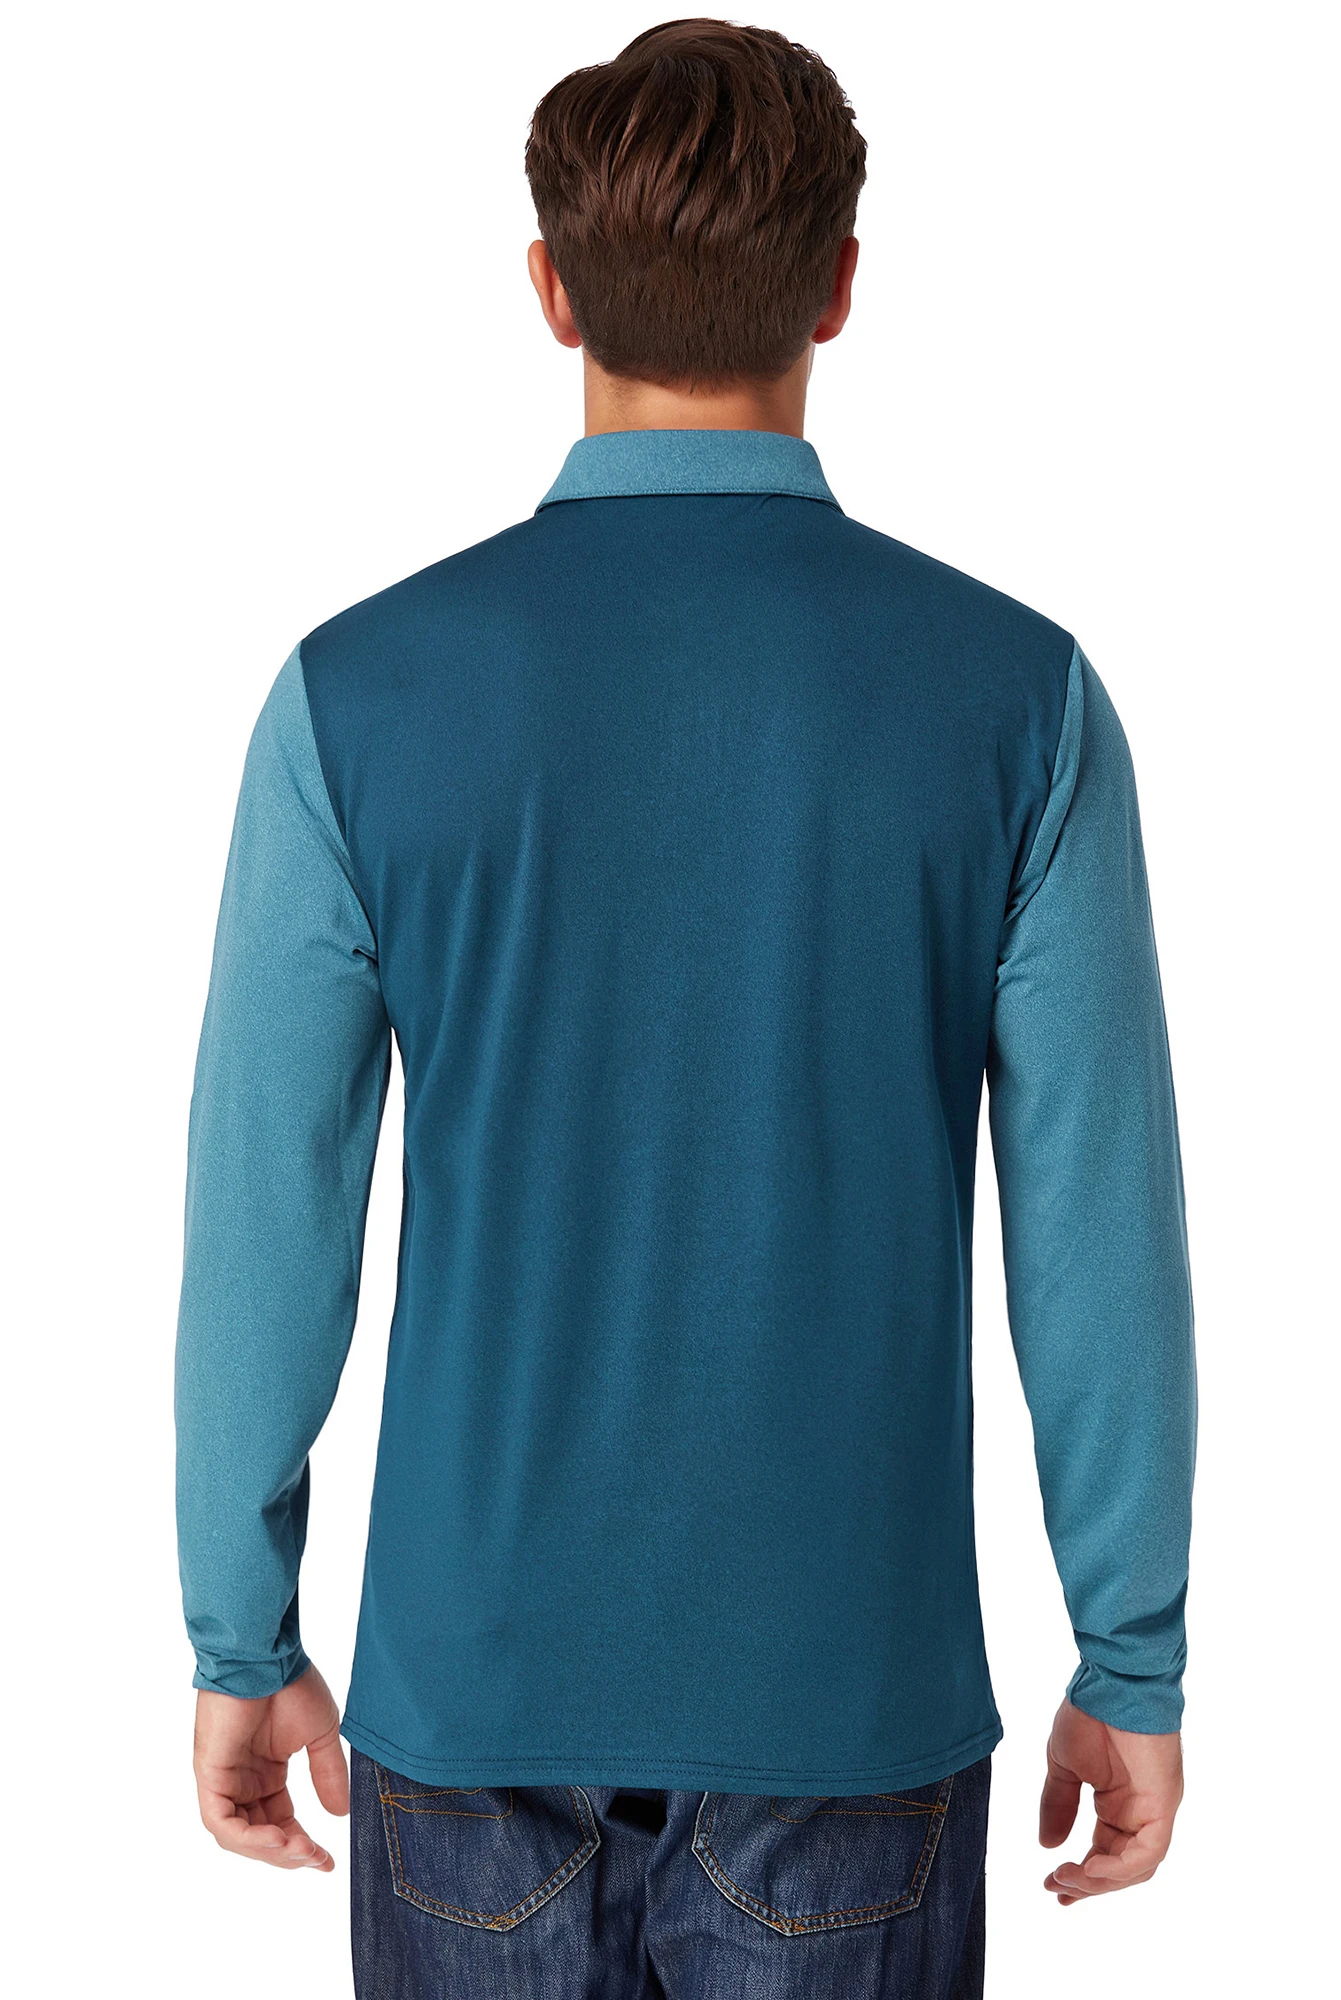 Custom two tone color block quick dry long sleeve golf polo t shirt